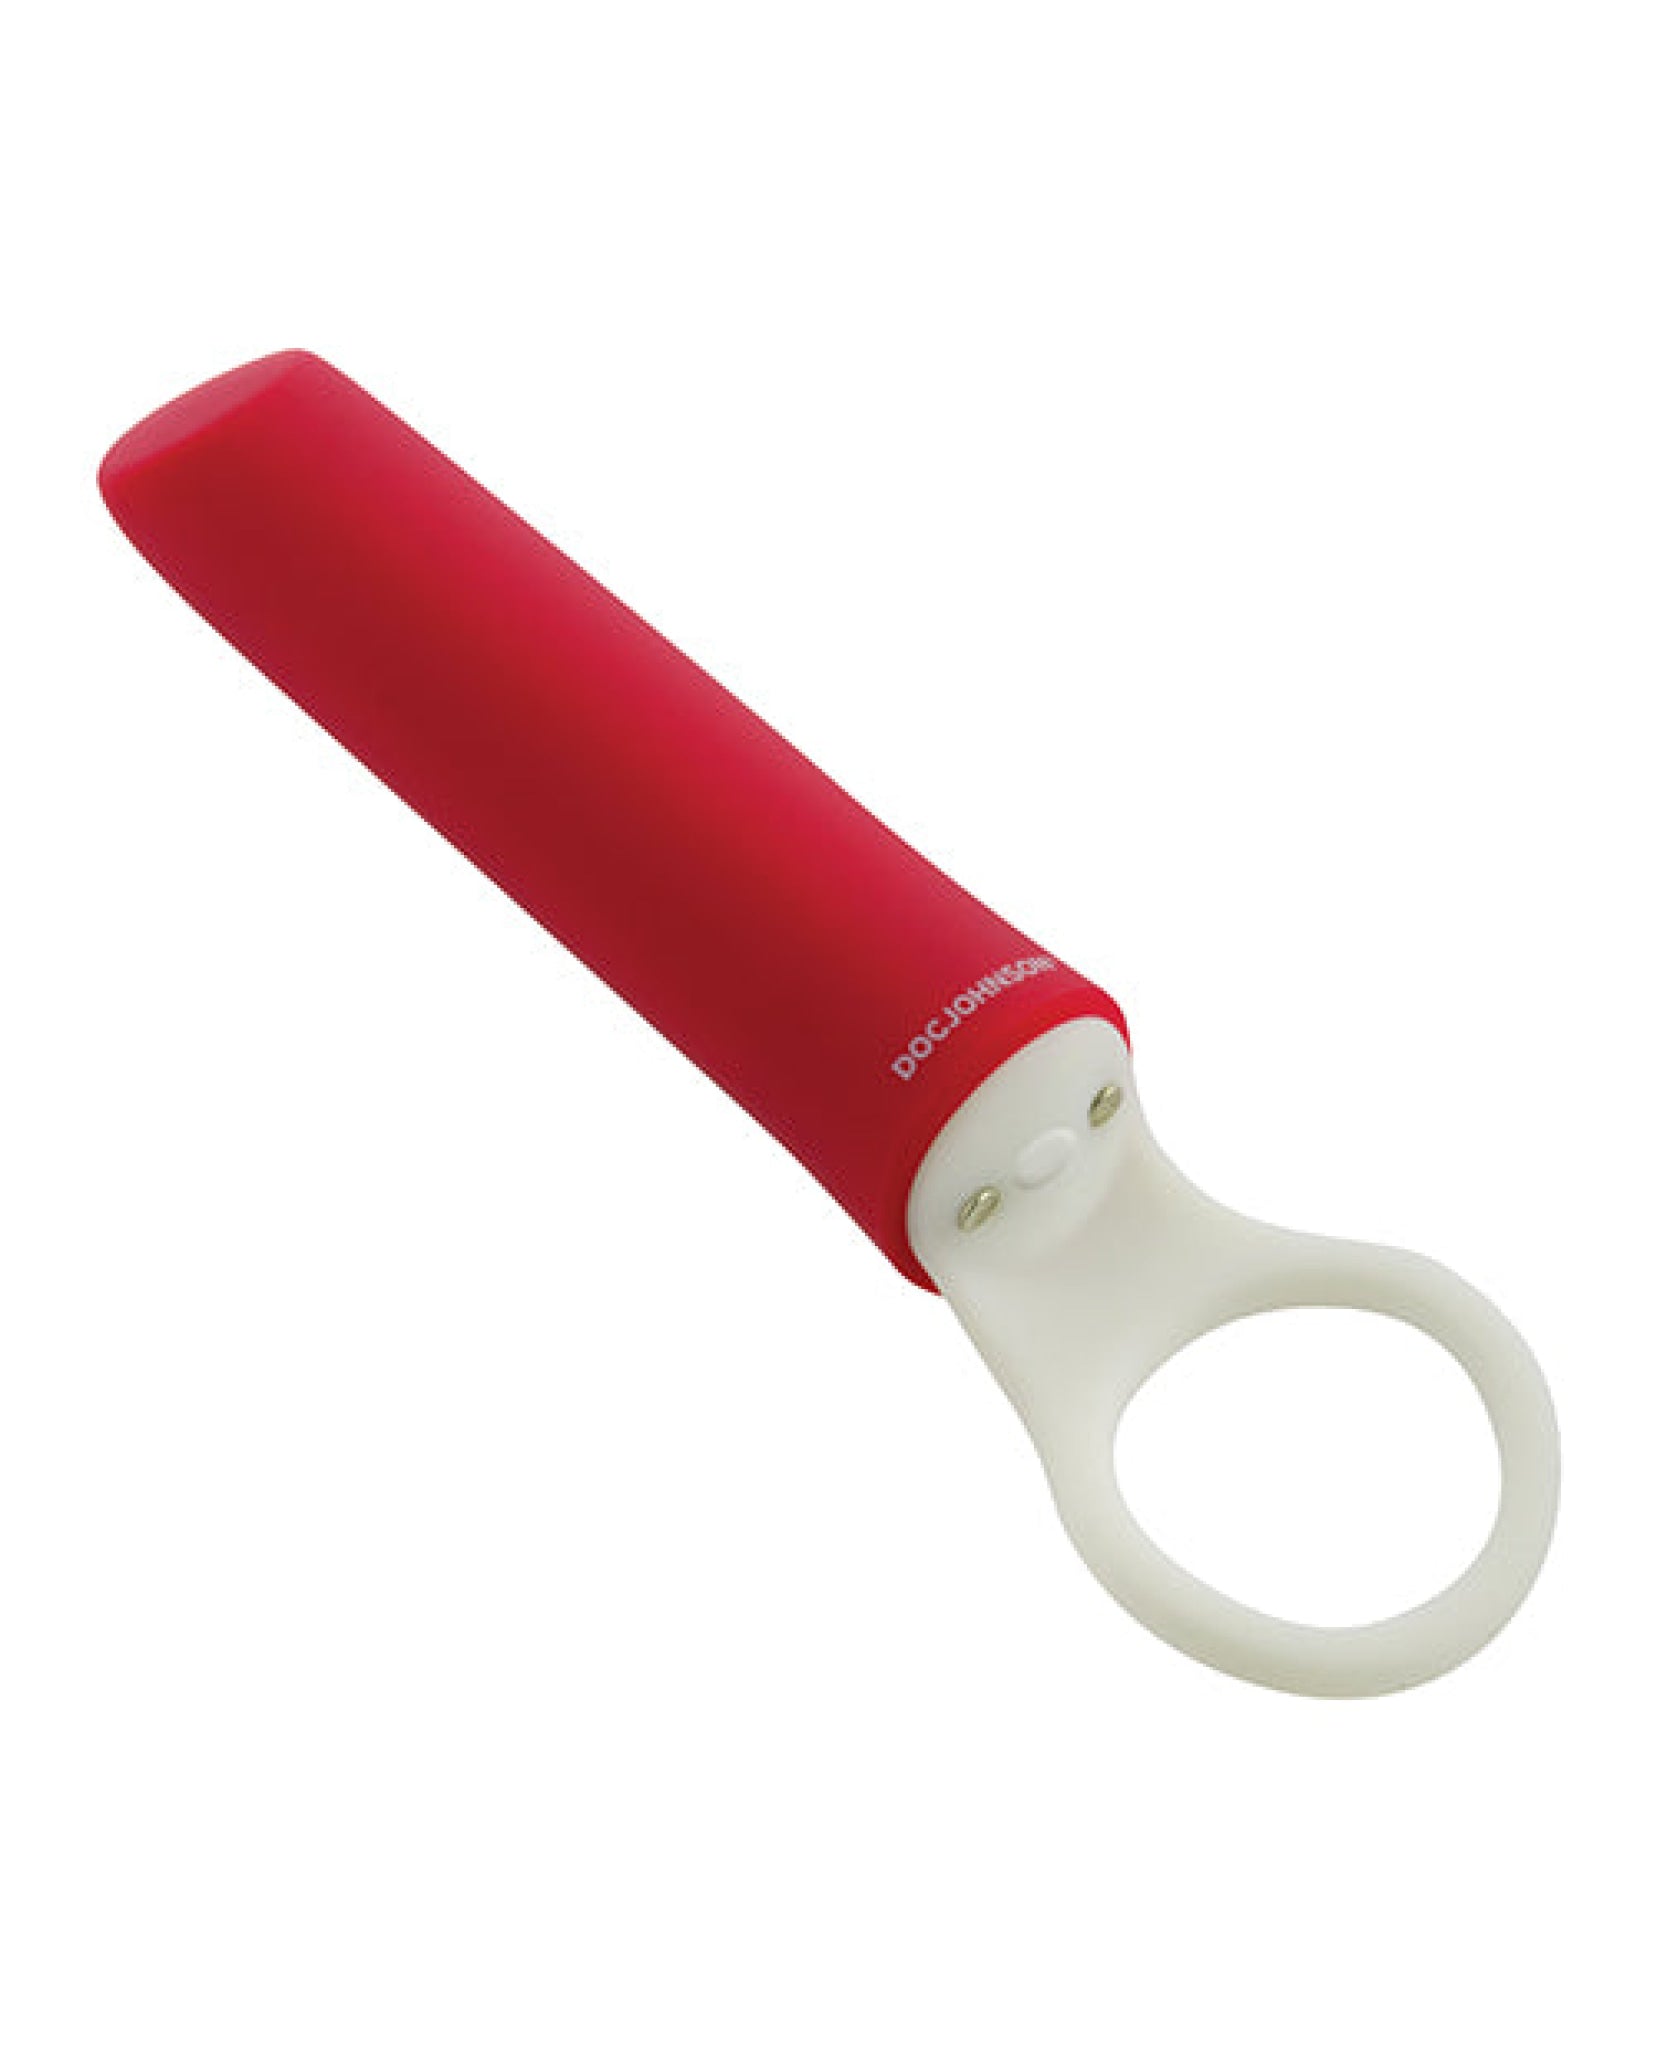 Ivibe Select Iplease Limited Edition - Red-white Doc Johnson